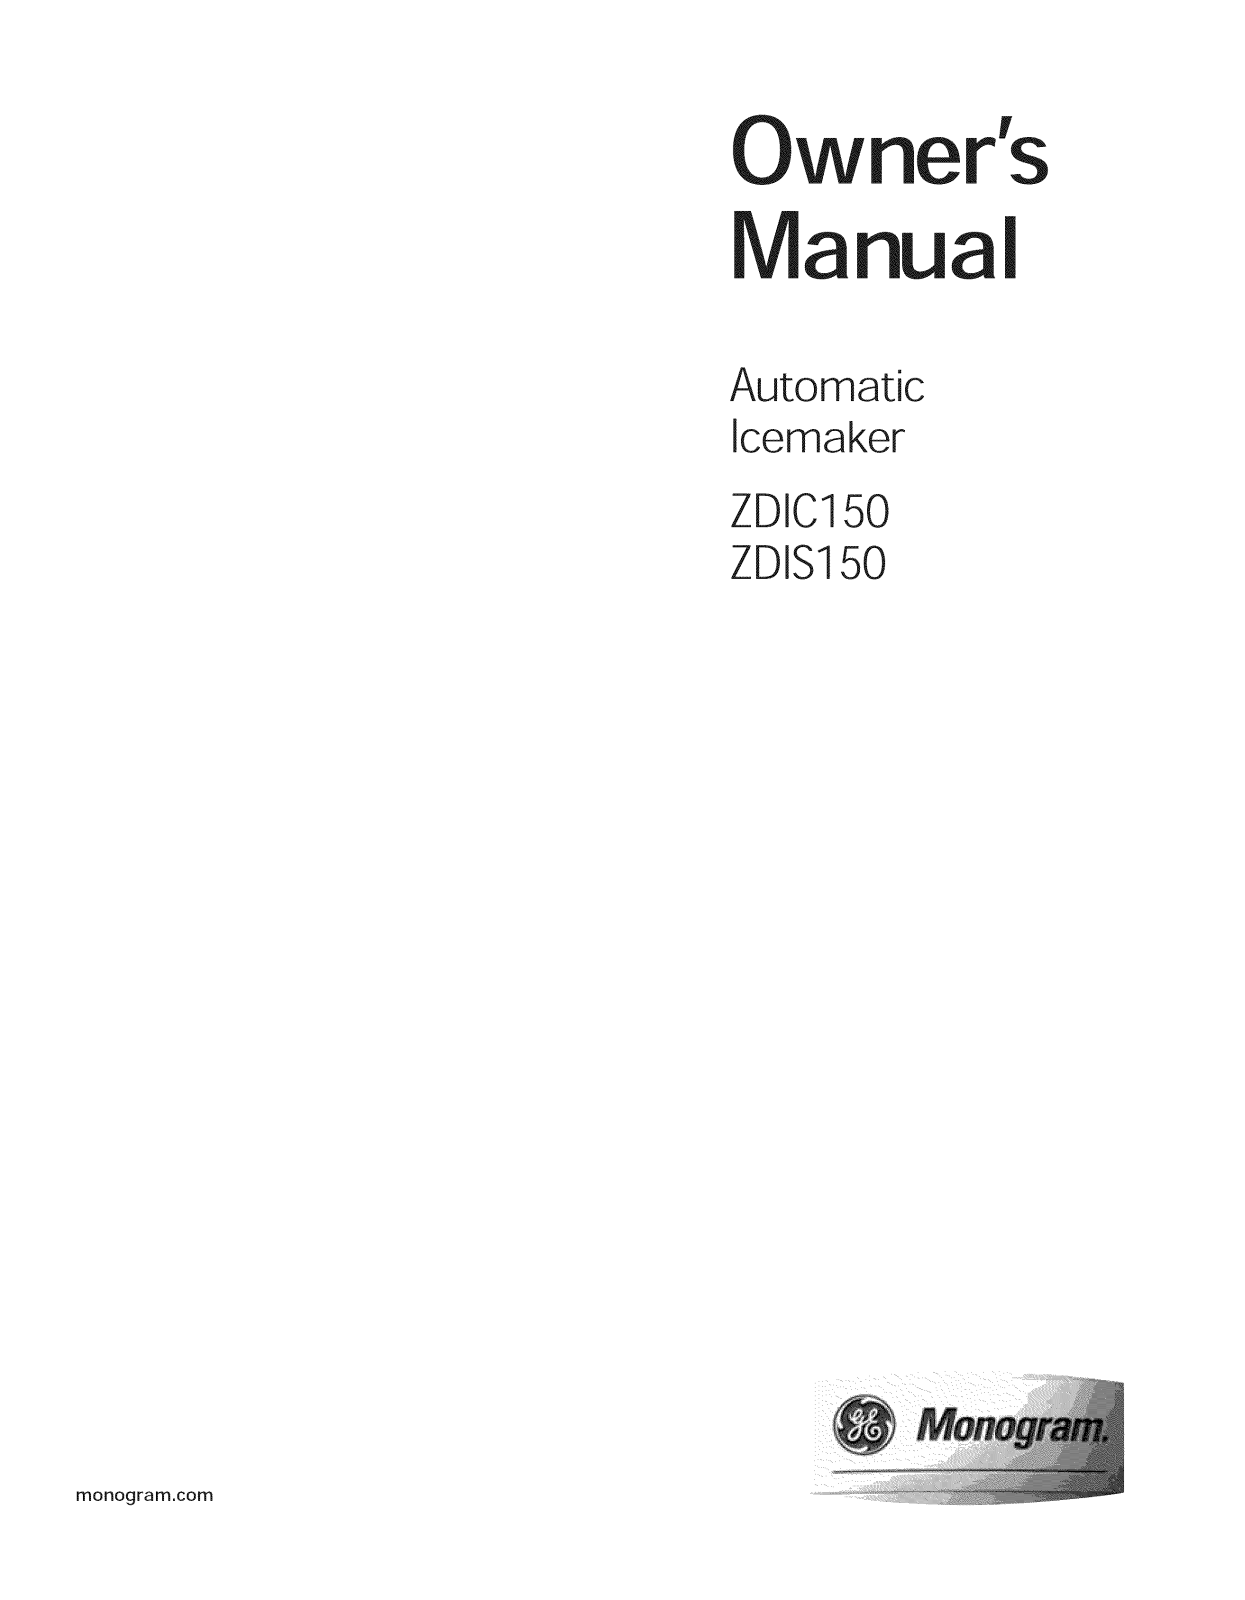 GE ZDIS150ZSSE, ZDIS150WSSE, ZDIC150ZBBE, ZDIC150WBBE Owner’s Manual